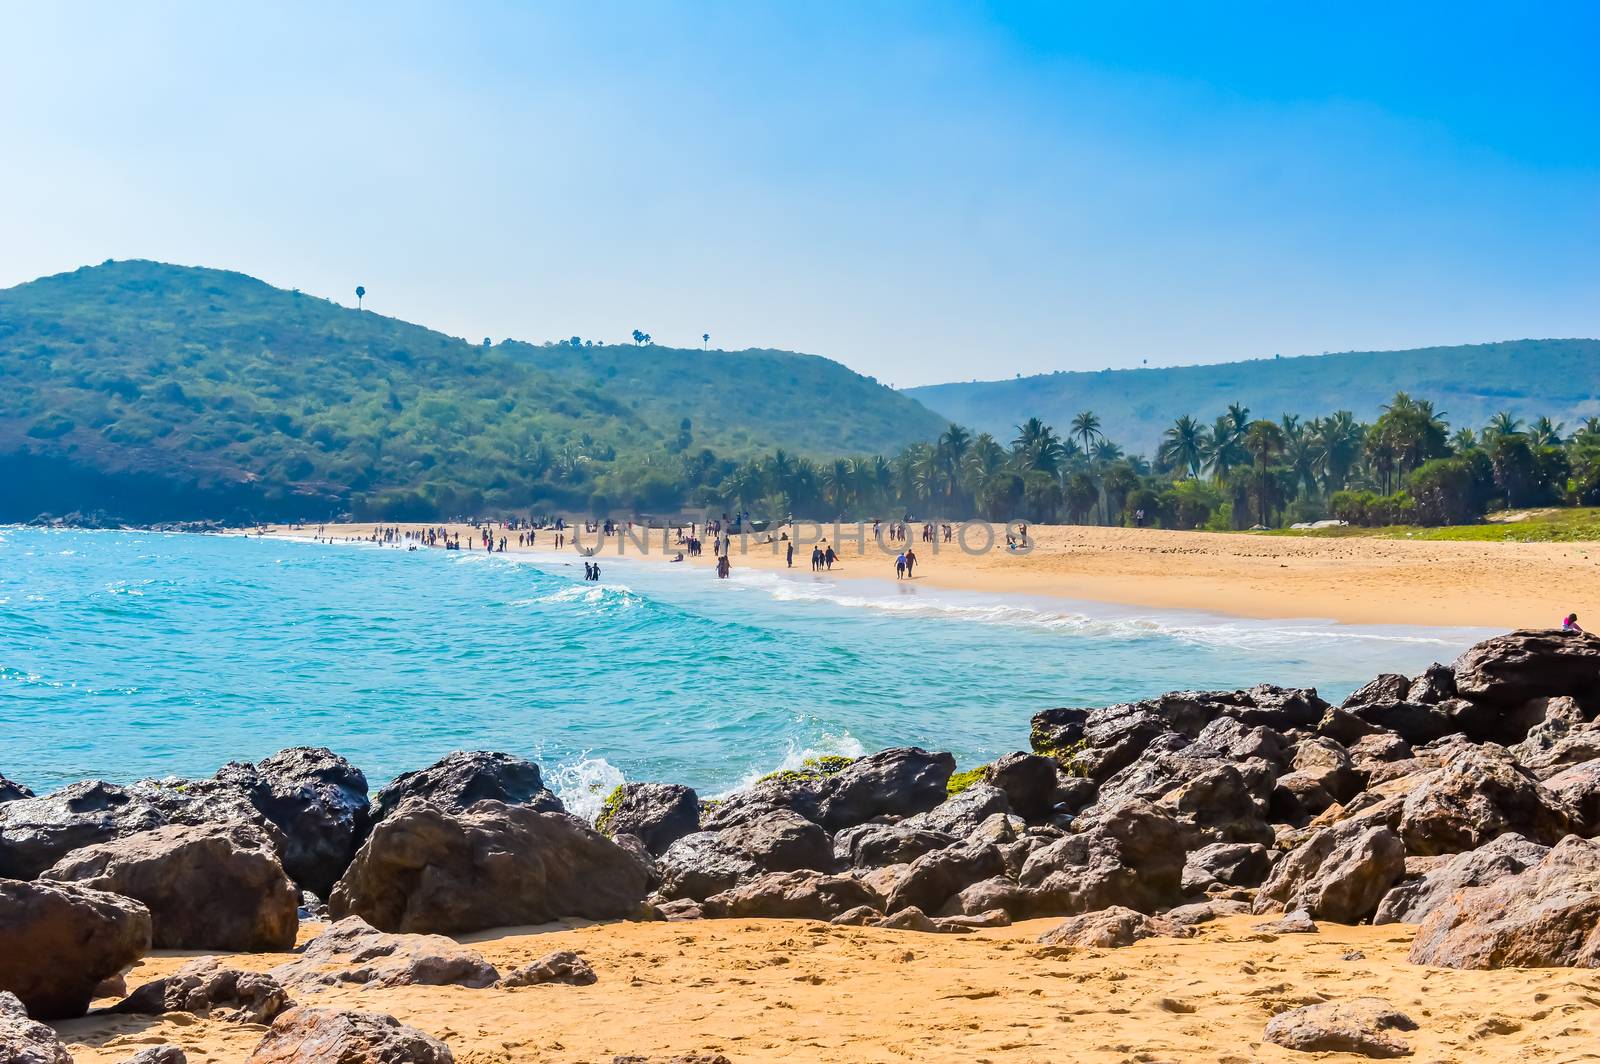 Photograph of Goa Sea Beach taken in Christmas Holiday during New Year celebration in landscape style Use for background screen saver e-cards website banner usage Travel holiday new year celebration